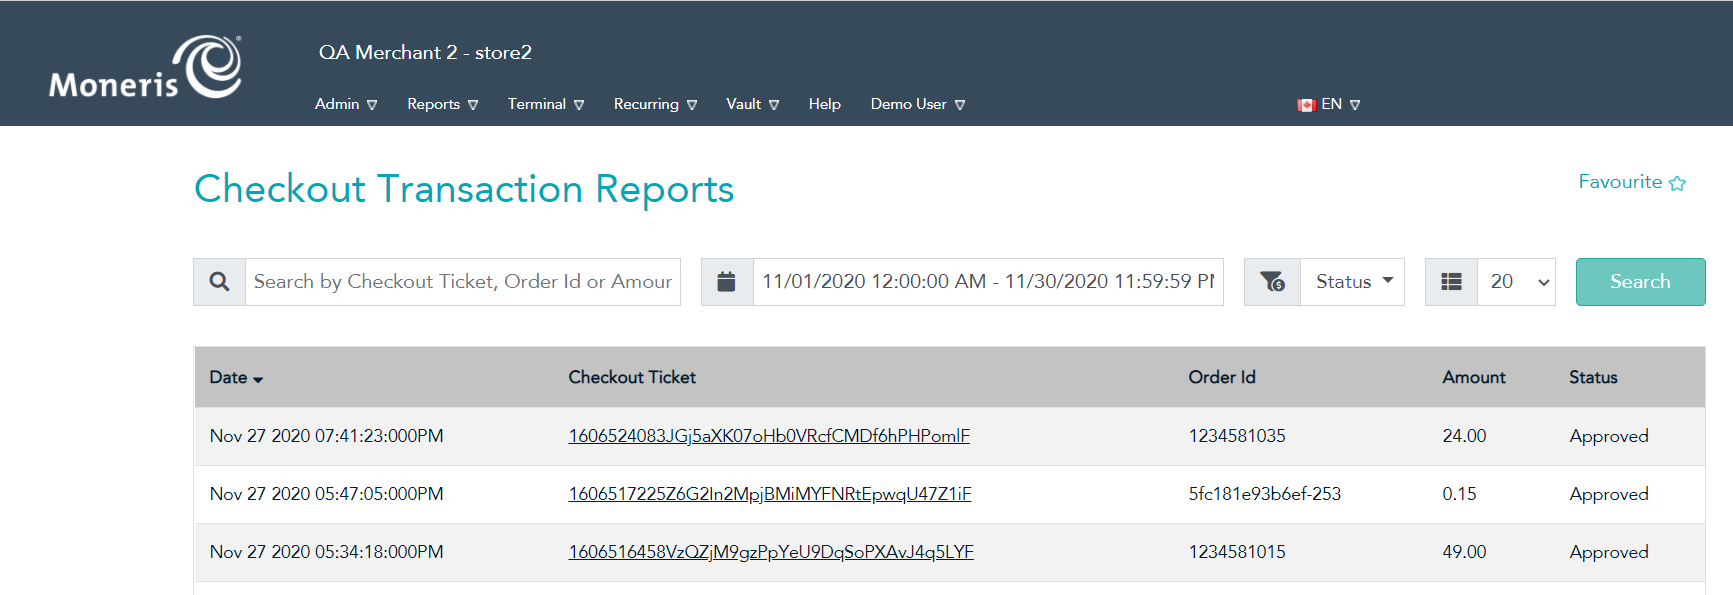 The results of the Checkout Transaction Reports shows the transaction date and time, the ticket number, Order ID, amount, and status.